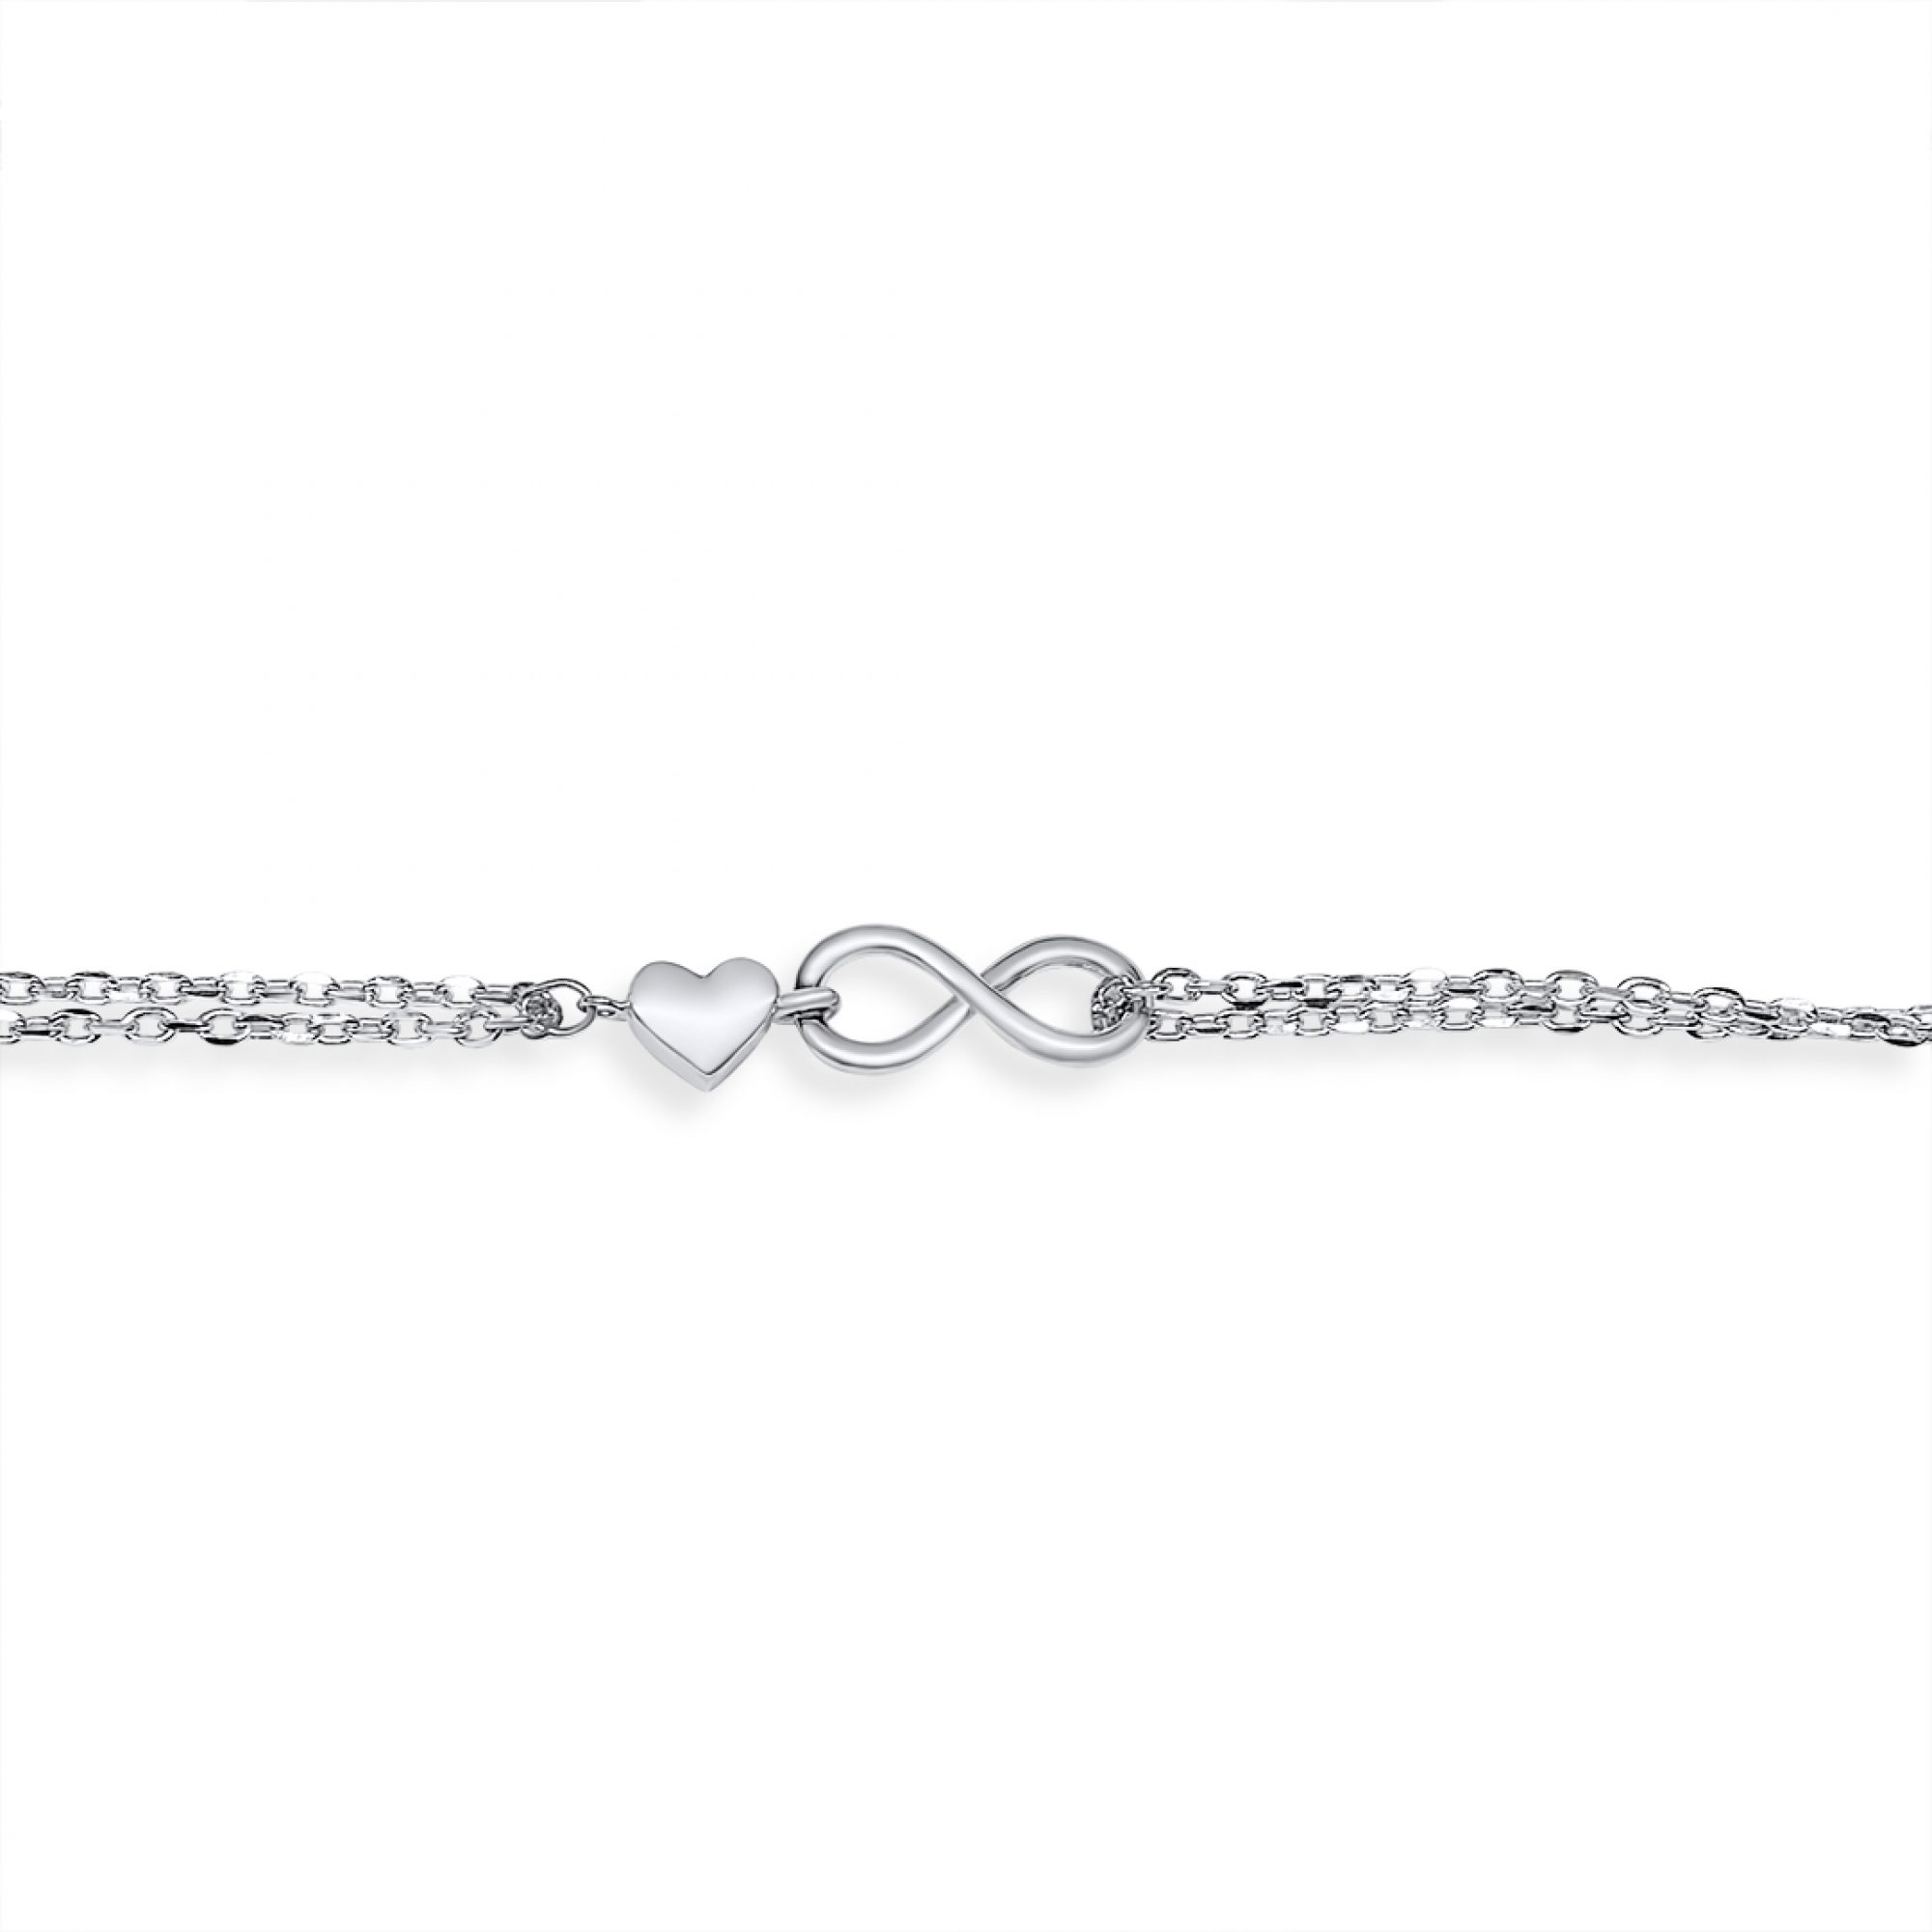 Double anklet with heart and infinity symbols